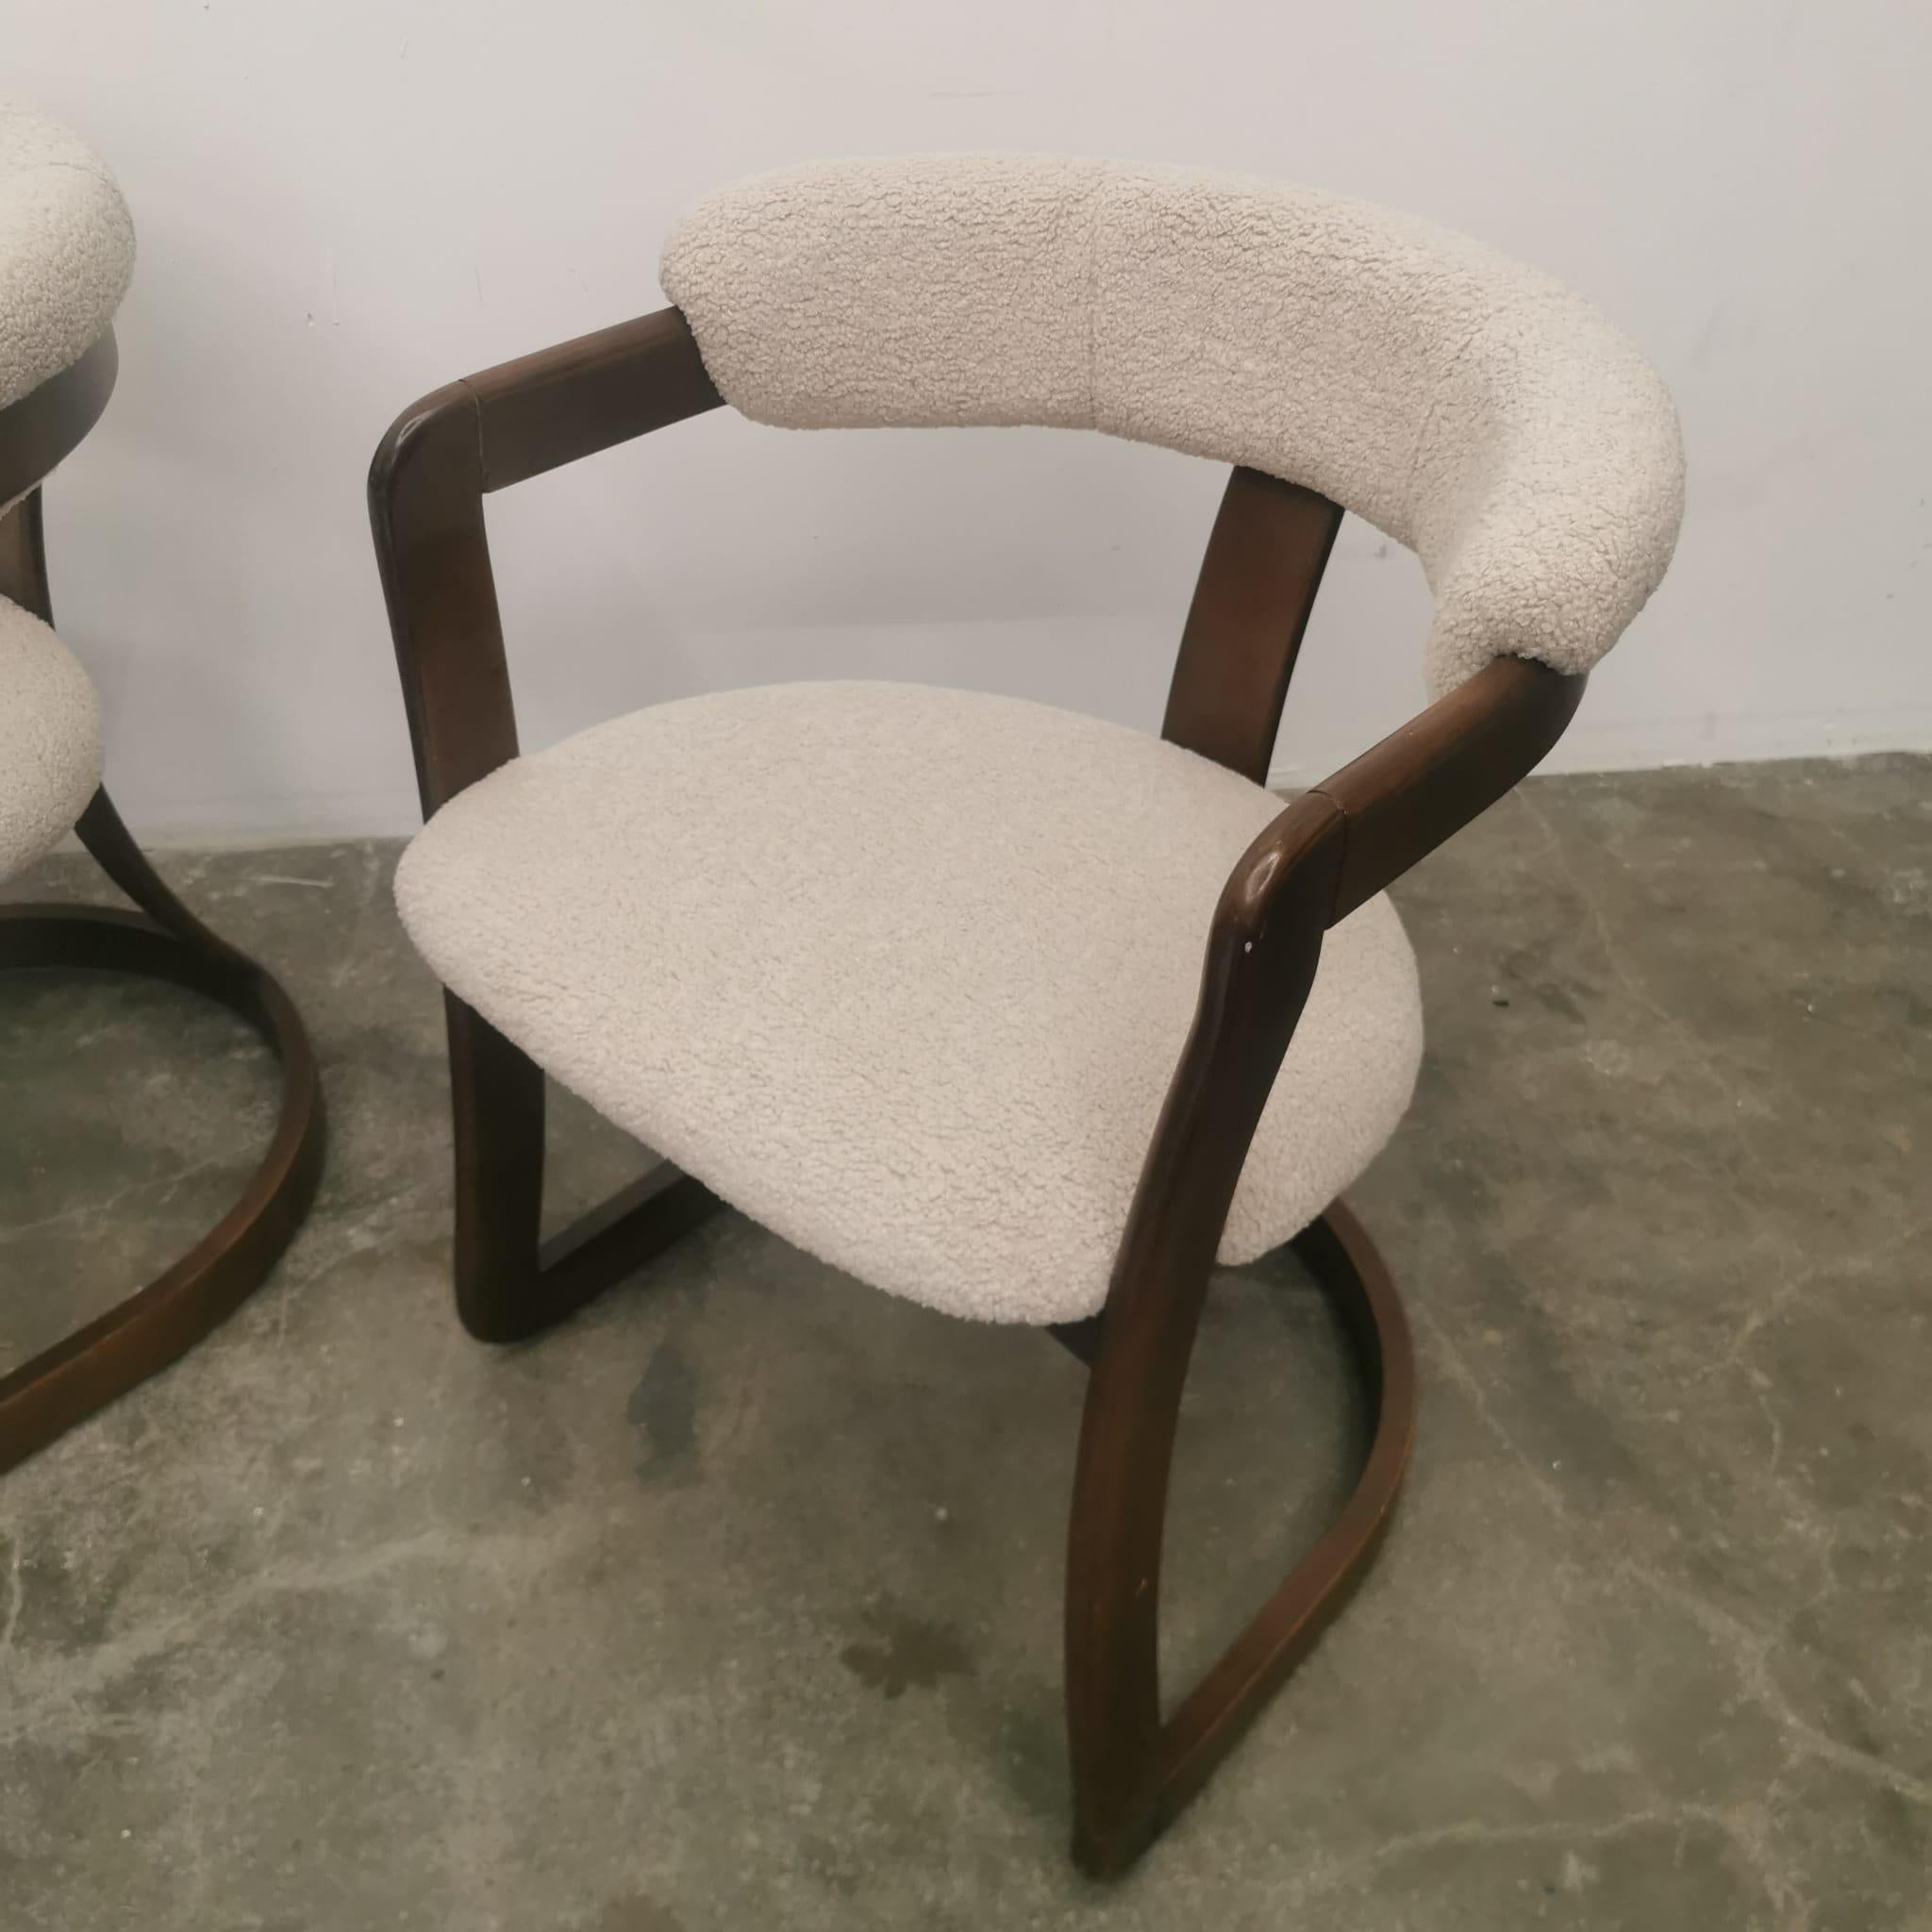 The set of two Pamplona style chairs brings a touch of timeless elegance and comfort to any interior space. Crafted from sturdy, high-quality wood, these chairs boast a classic design with a modern twist. The combination of the wooden frame and the